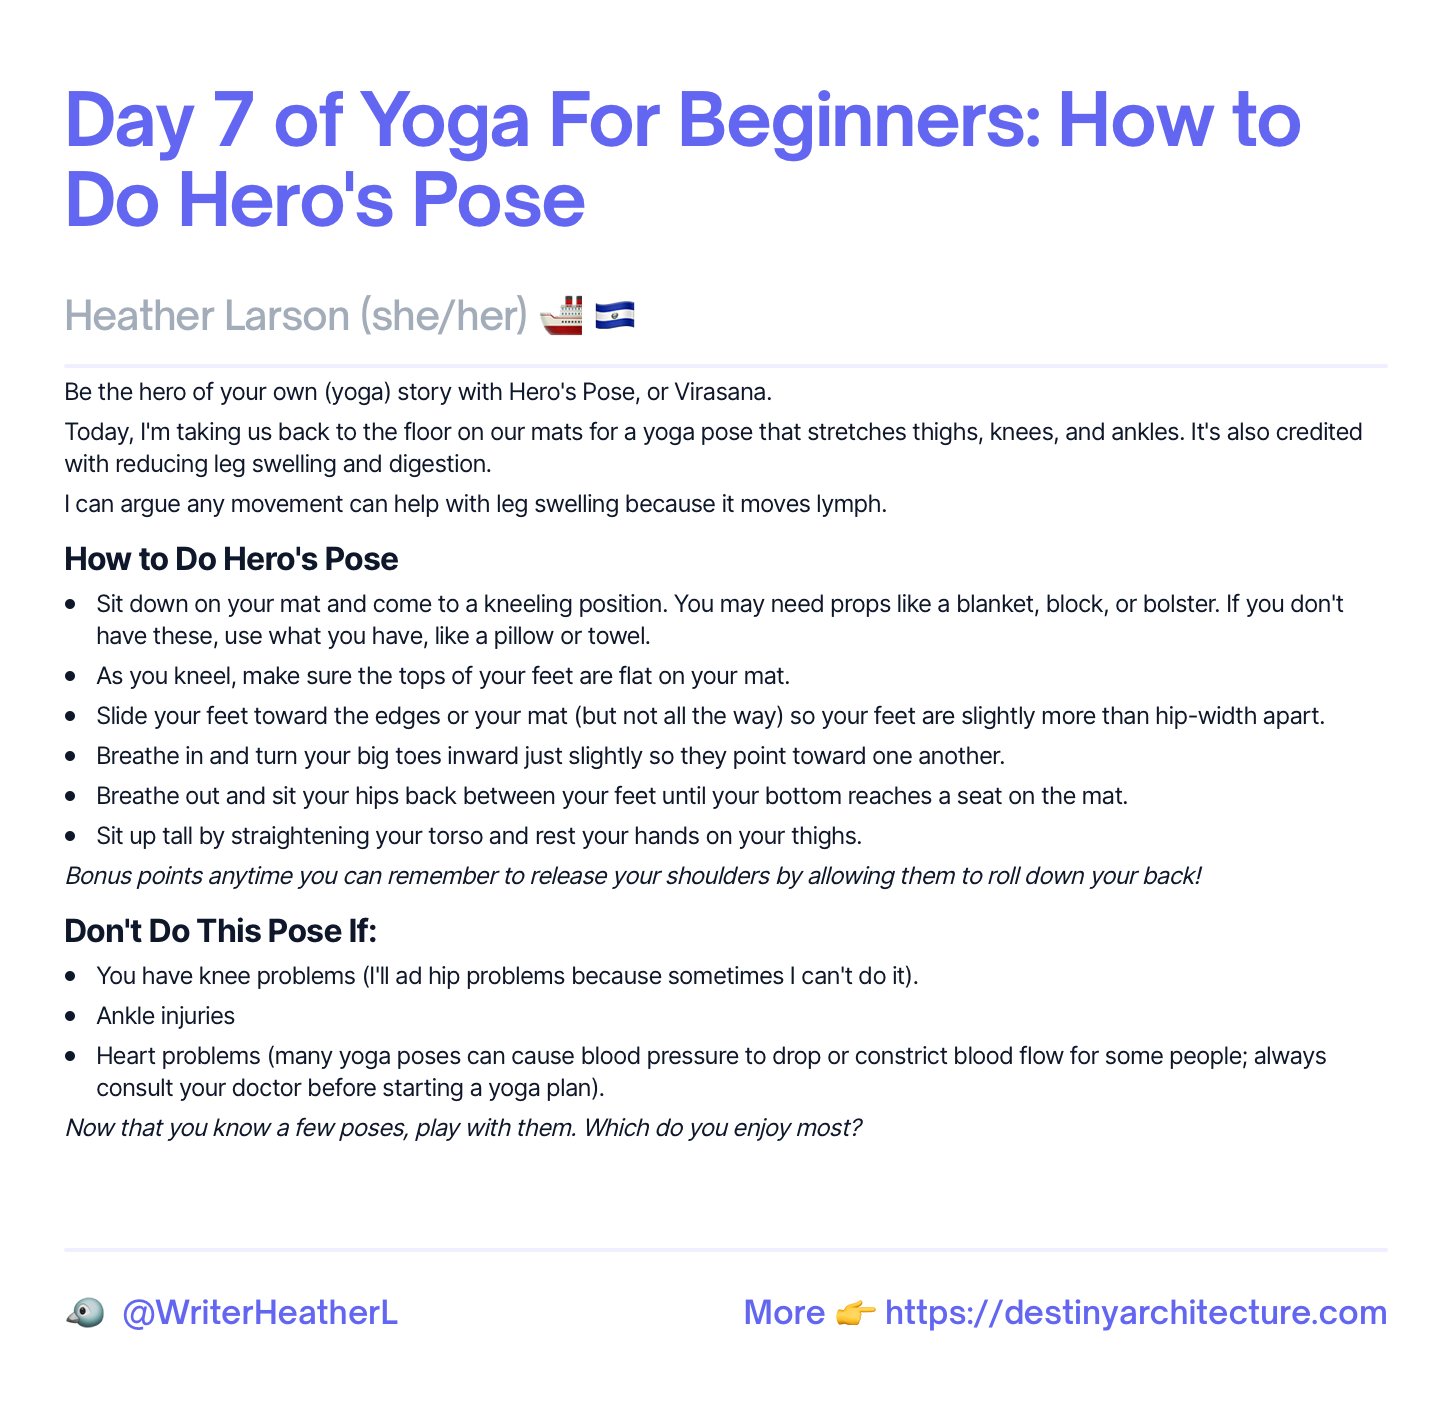 Day 7 of Yoga For Beginners: How to Do Hero's Pose